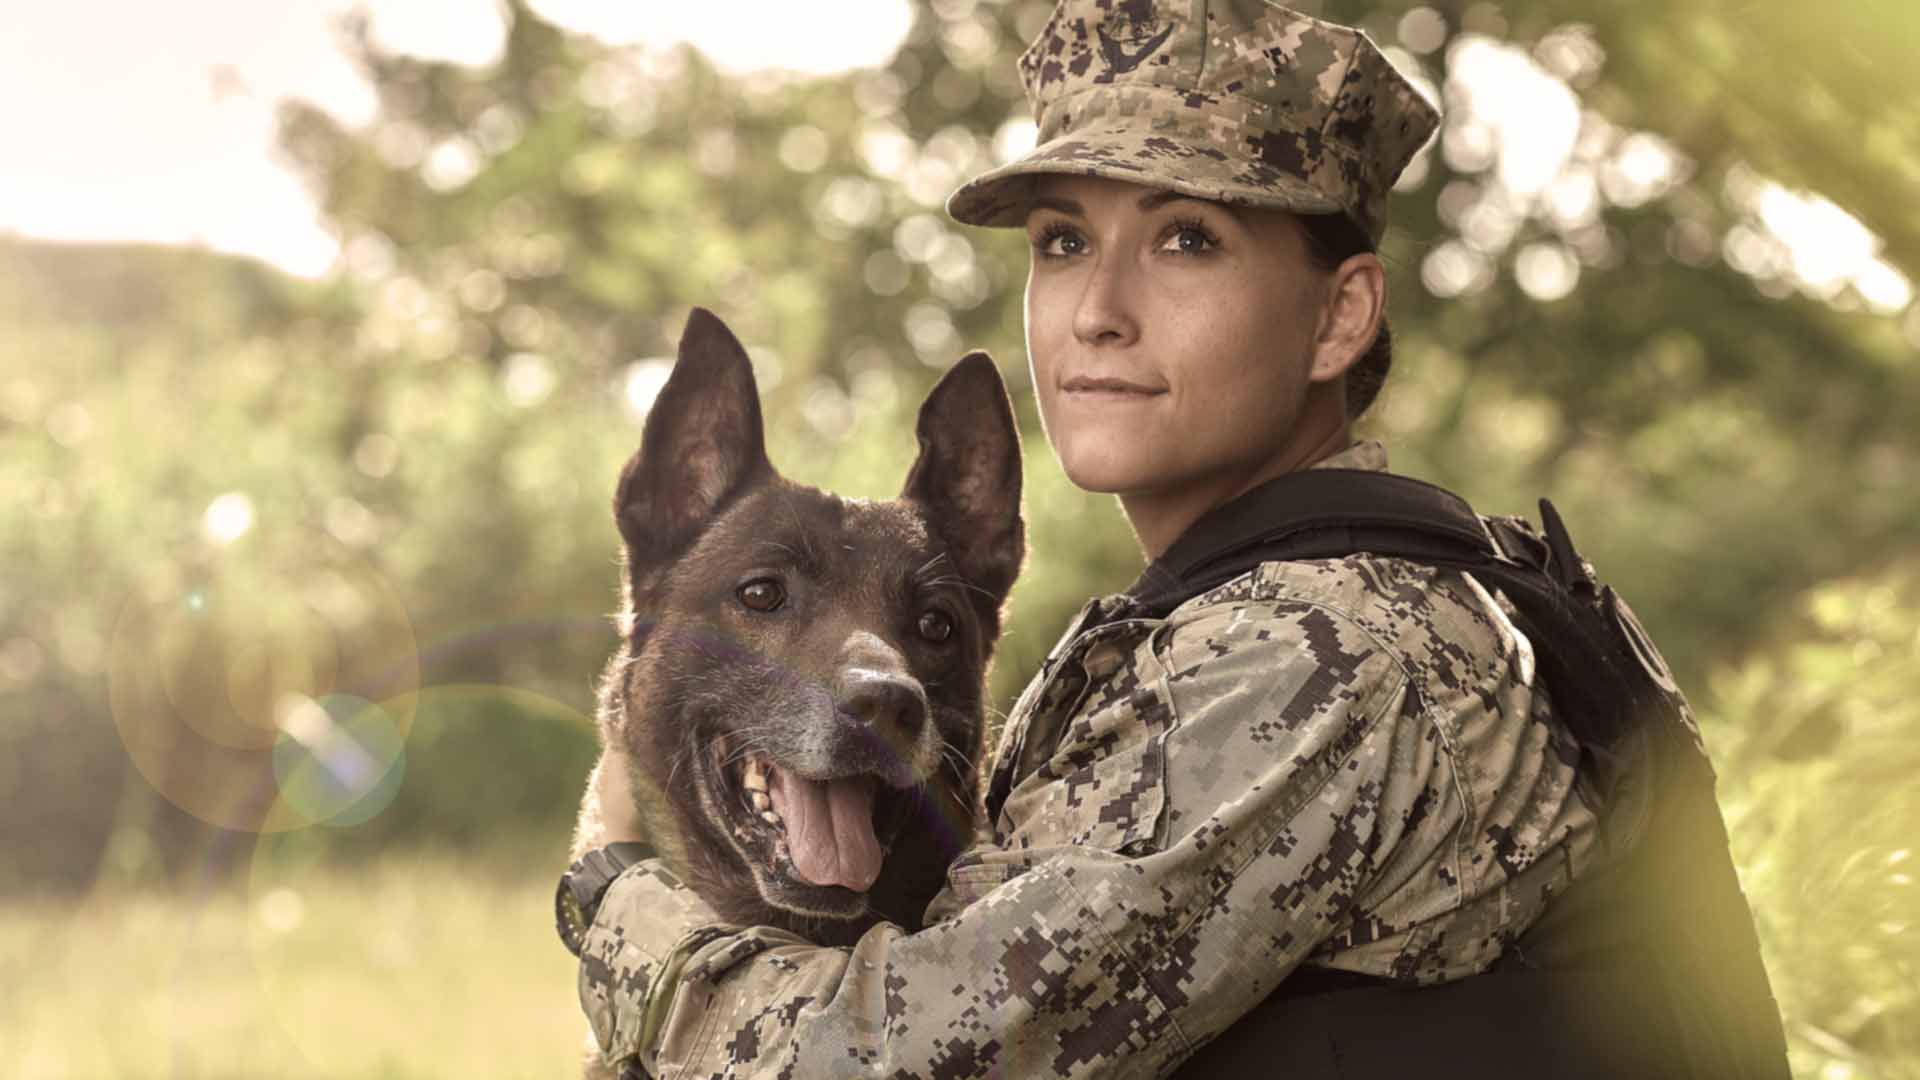 us navy master at arms rachel higuera with german shepherd named chucky, a trained member of the us navy k-9 team 